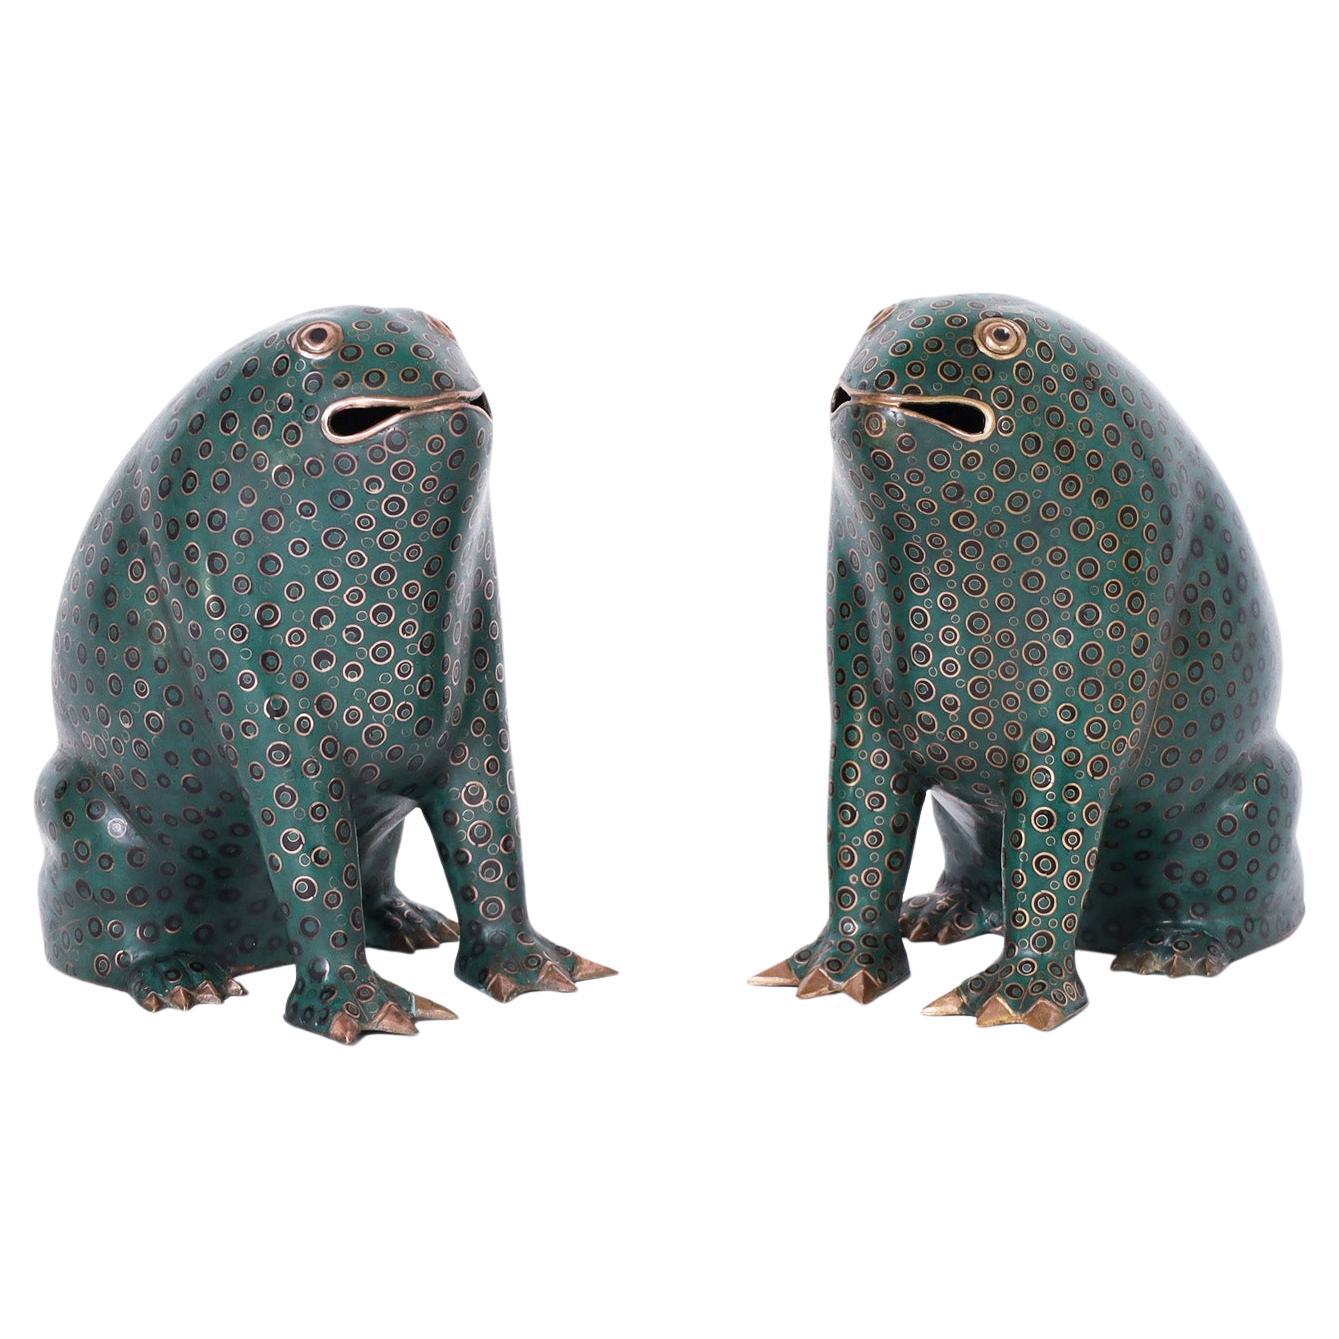 Pair of Chinese Cloisonné Frogs